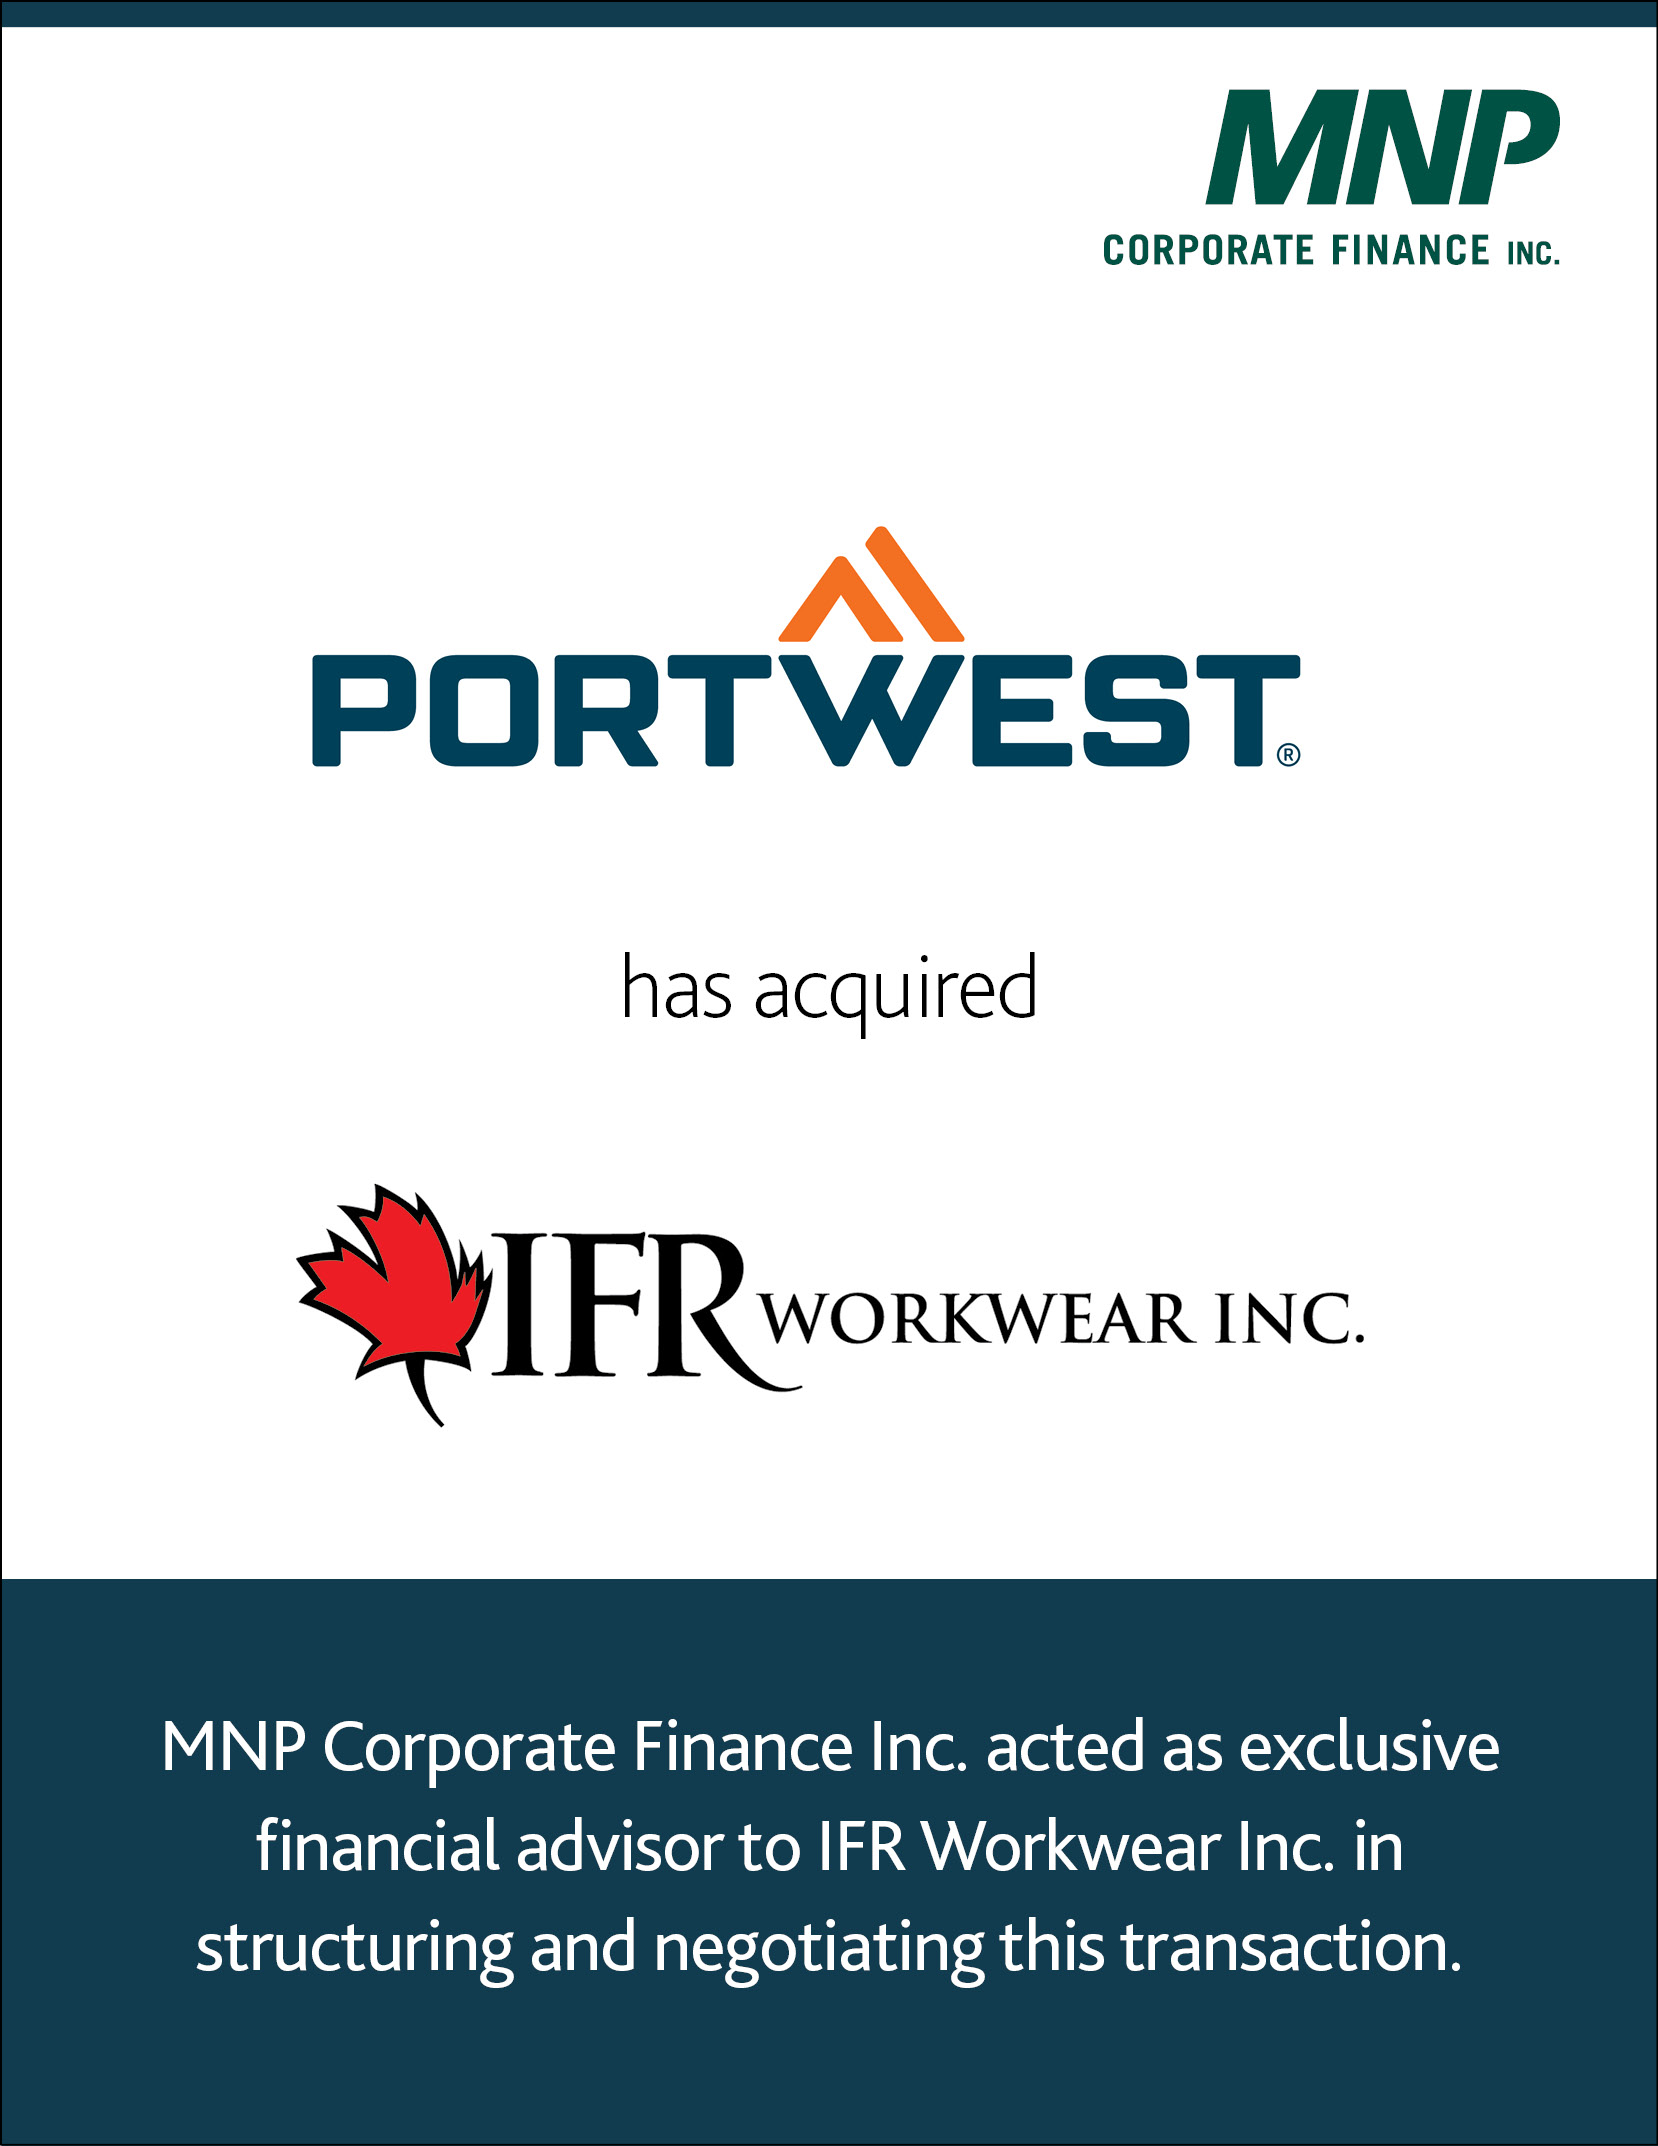 Portwest has acquired IFR Workwear inc.